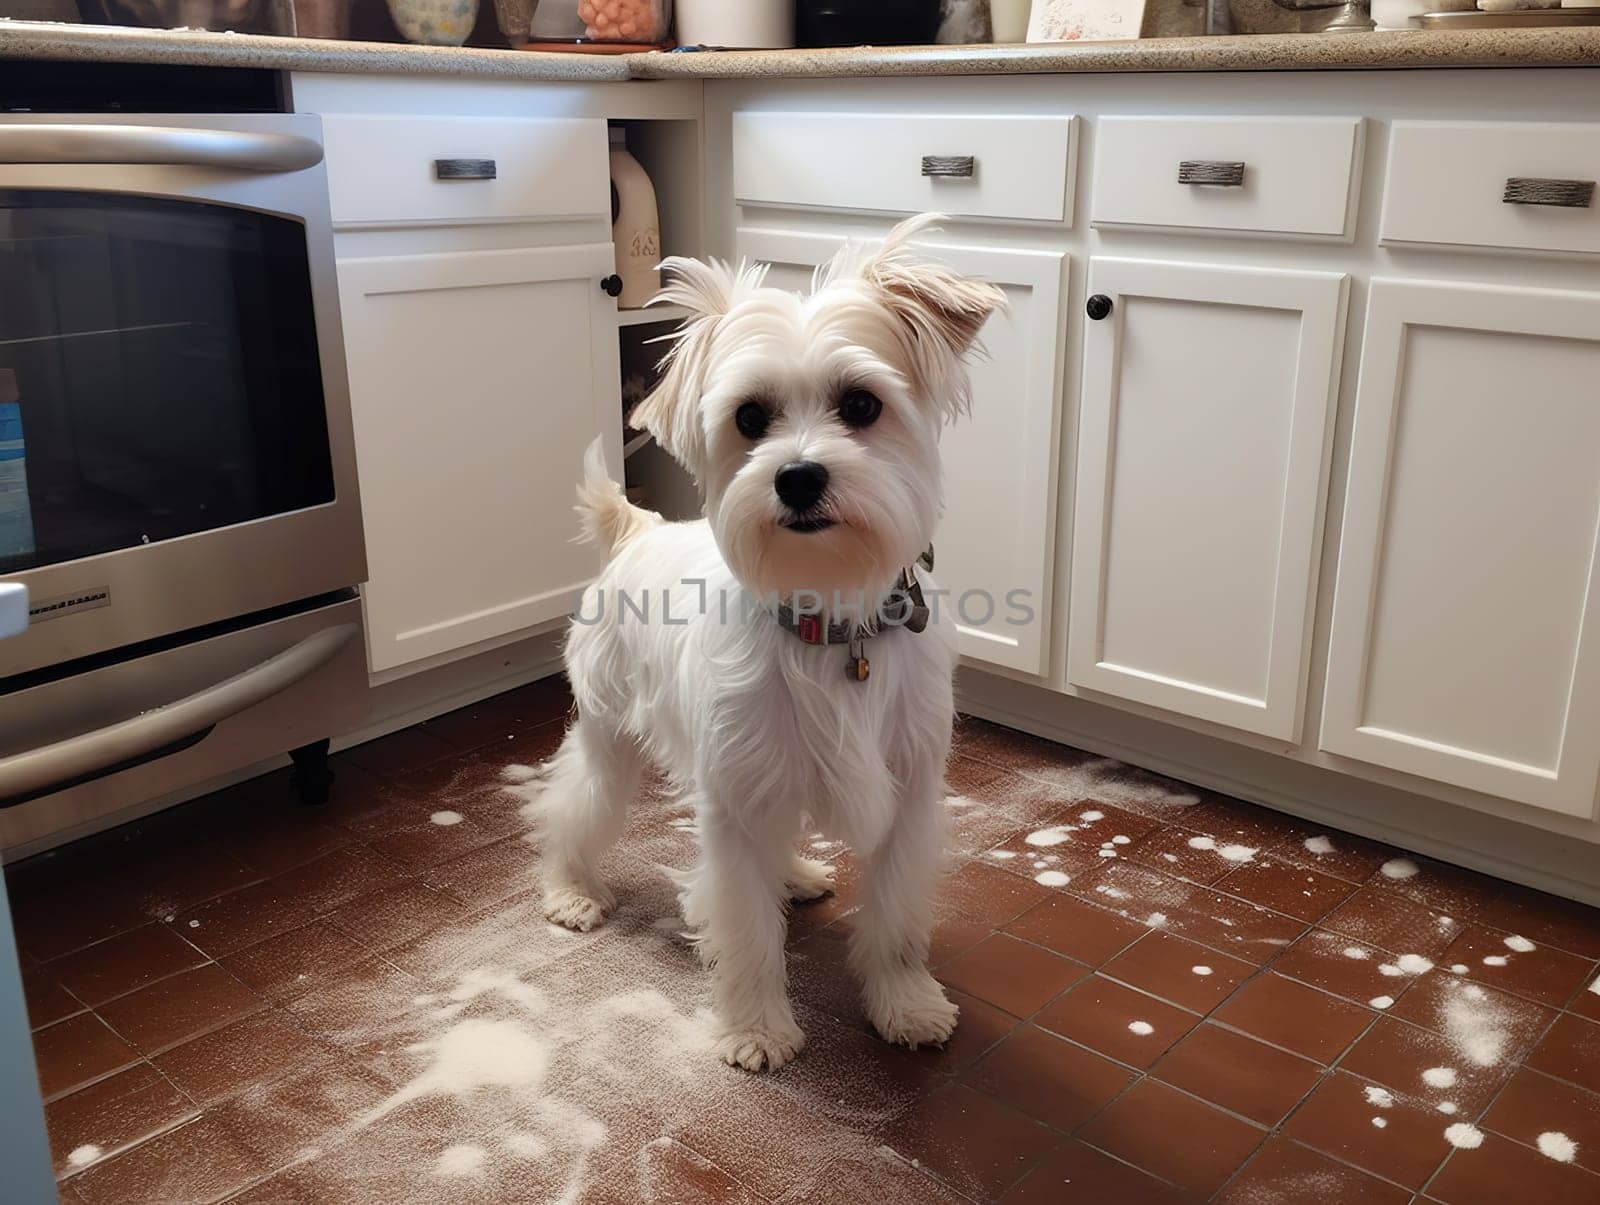 Small Beautiful White Yorkshire Terrier Breed Dog Made A Mess In The Kitchen